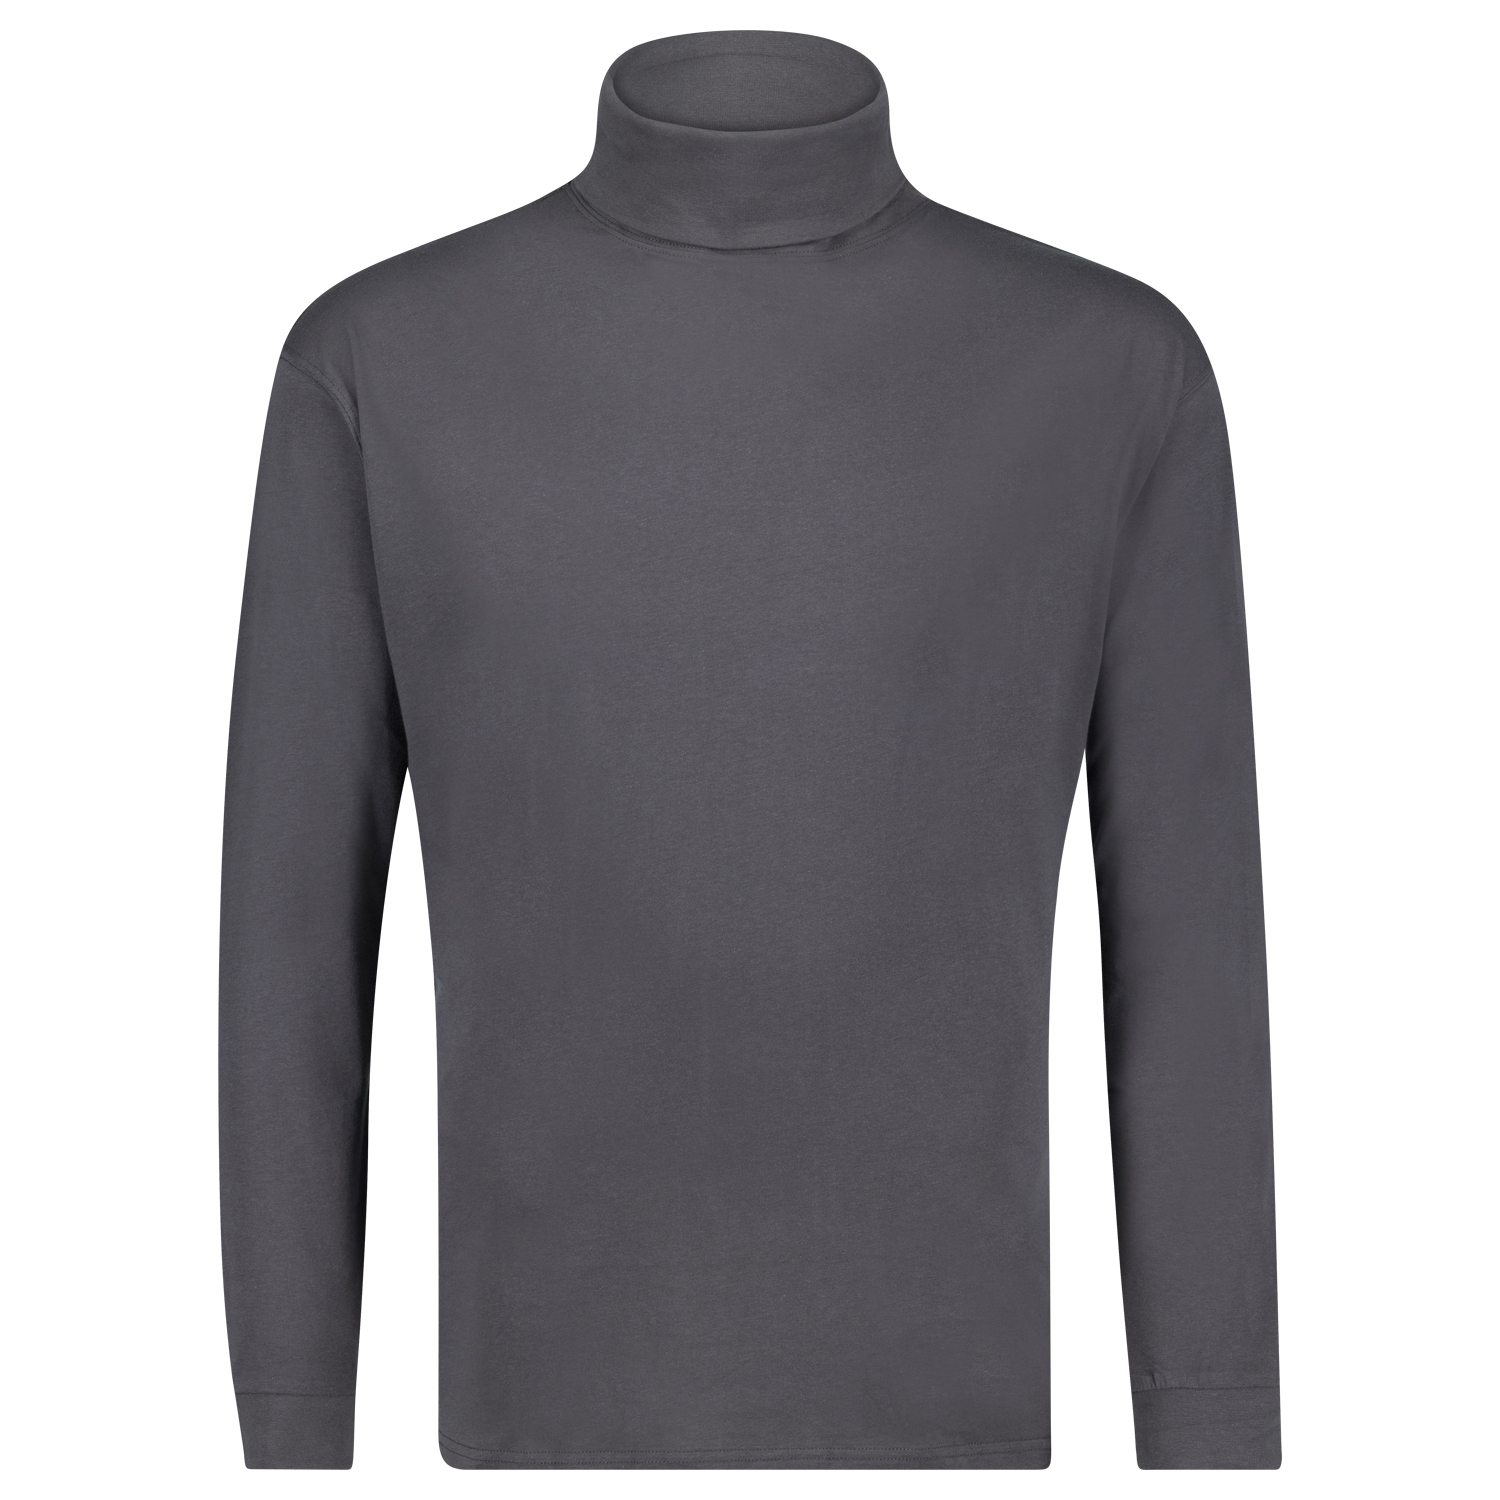 Longsleeve for men COMFORT FIT with turtle neck in anthrazit by ADAMO in size 2XL up to oversize 12XL